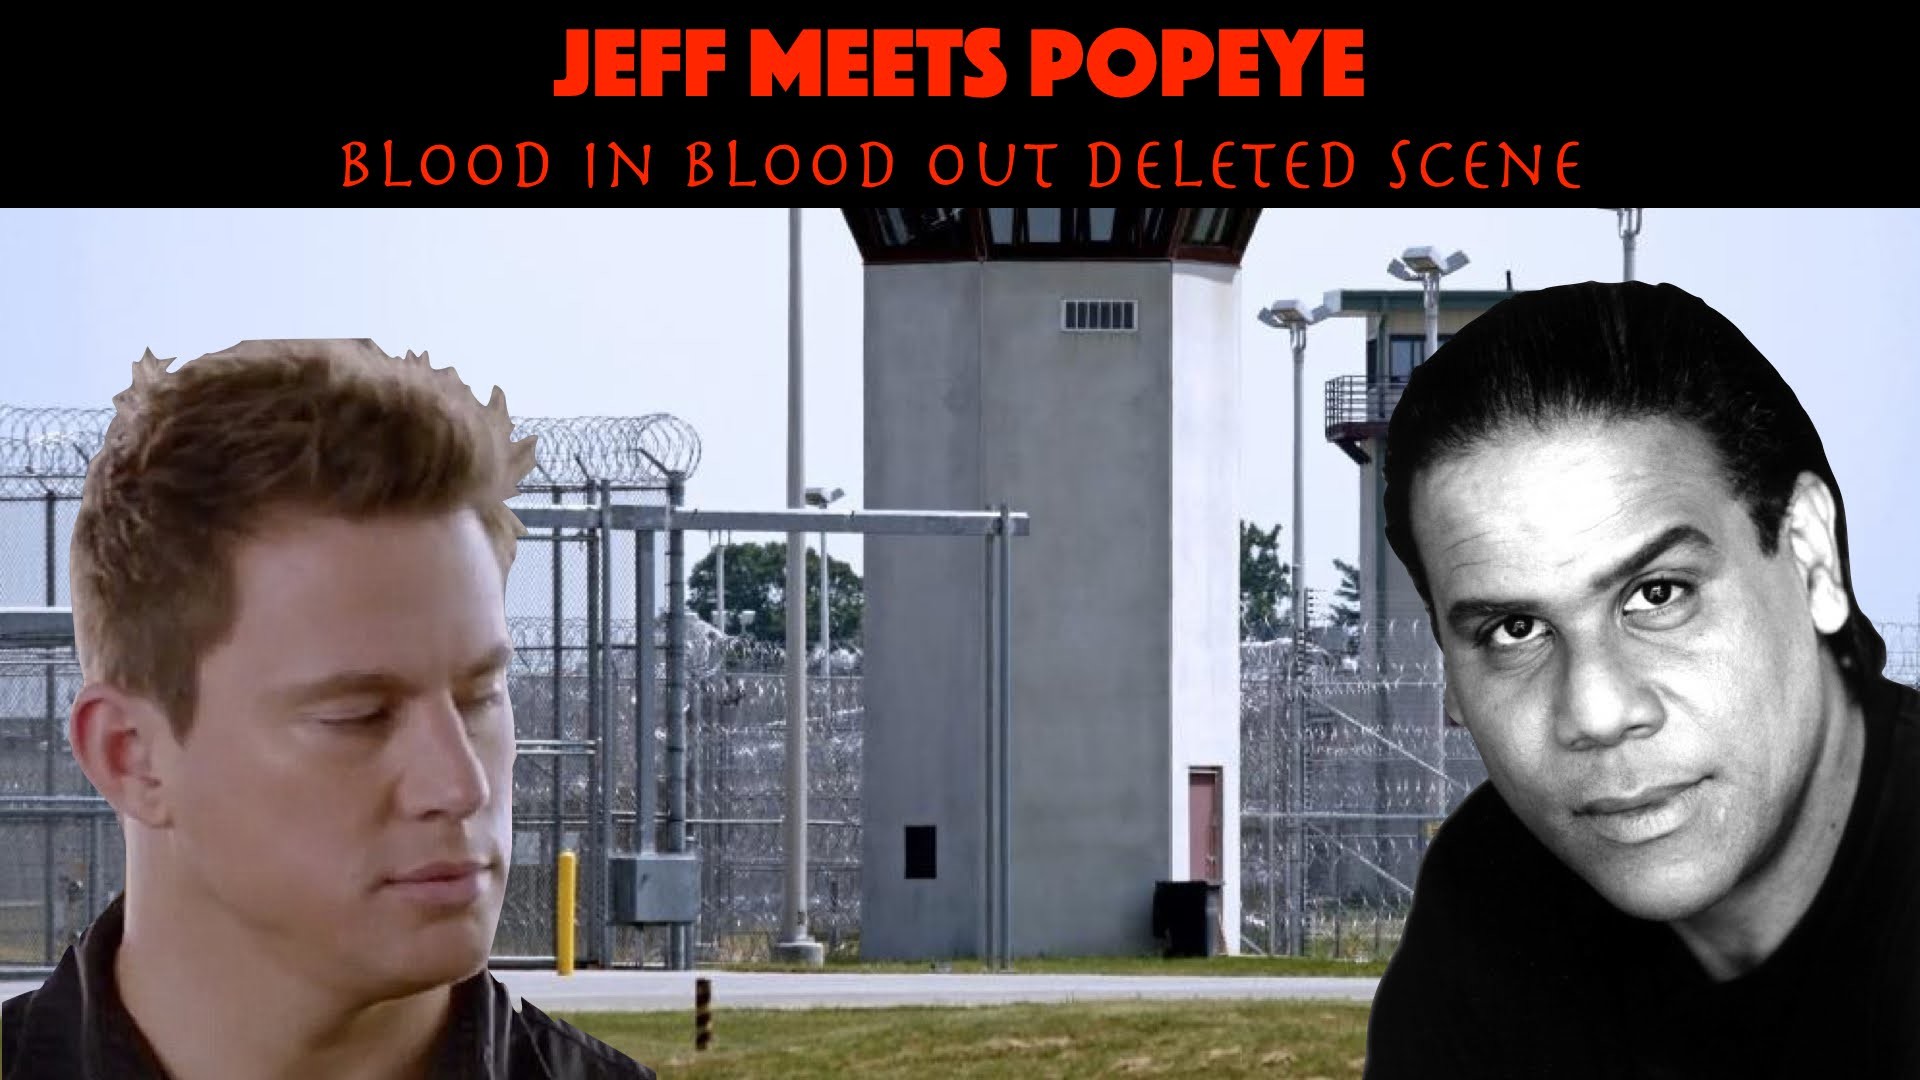 1920x1080 Jeff meets Popeye in prison: deleted scene from Blood in Blood Out - YouTube